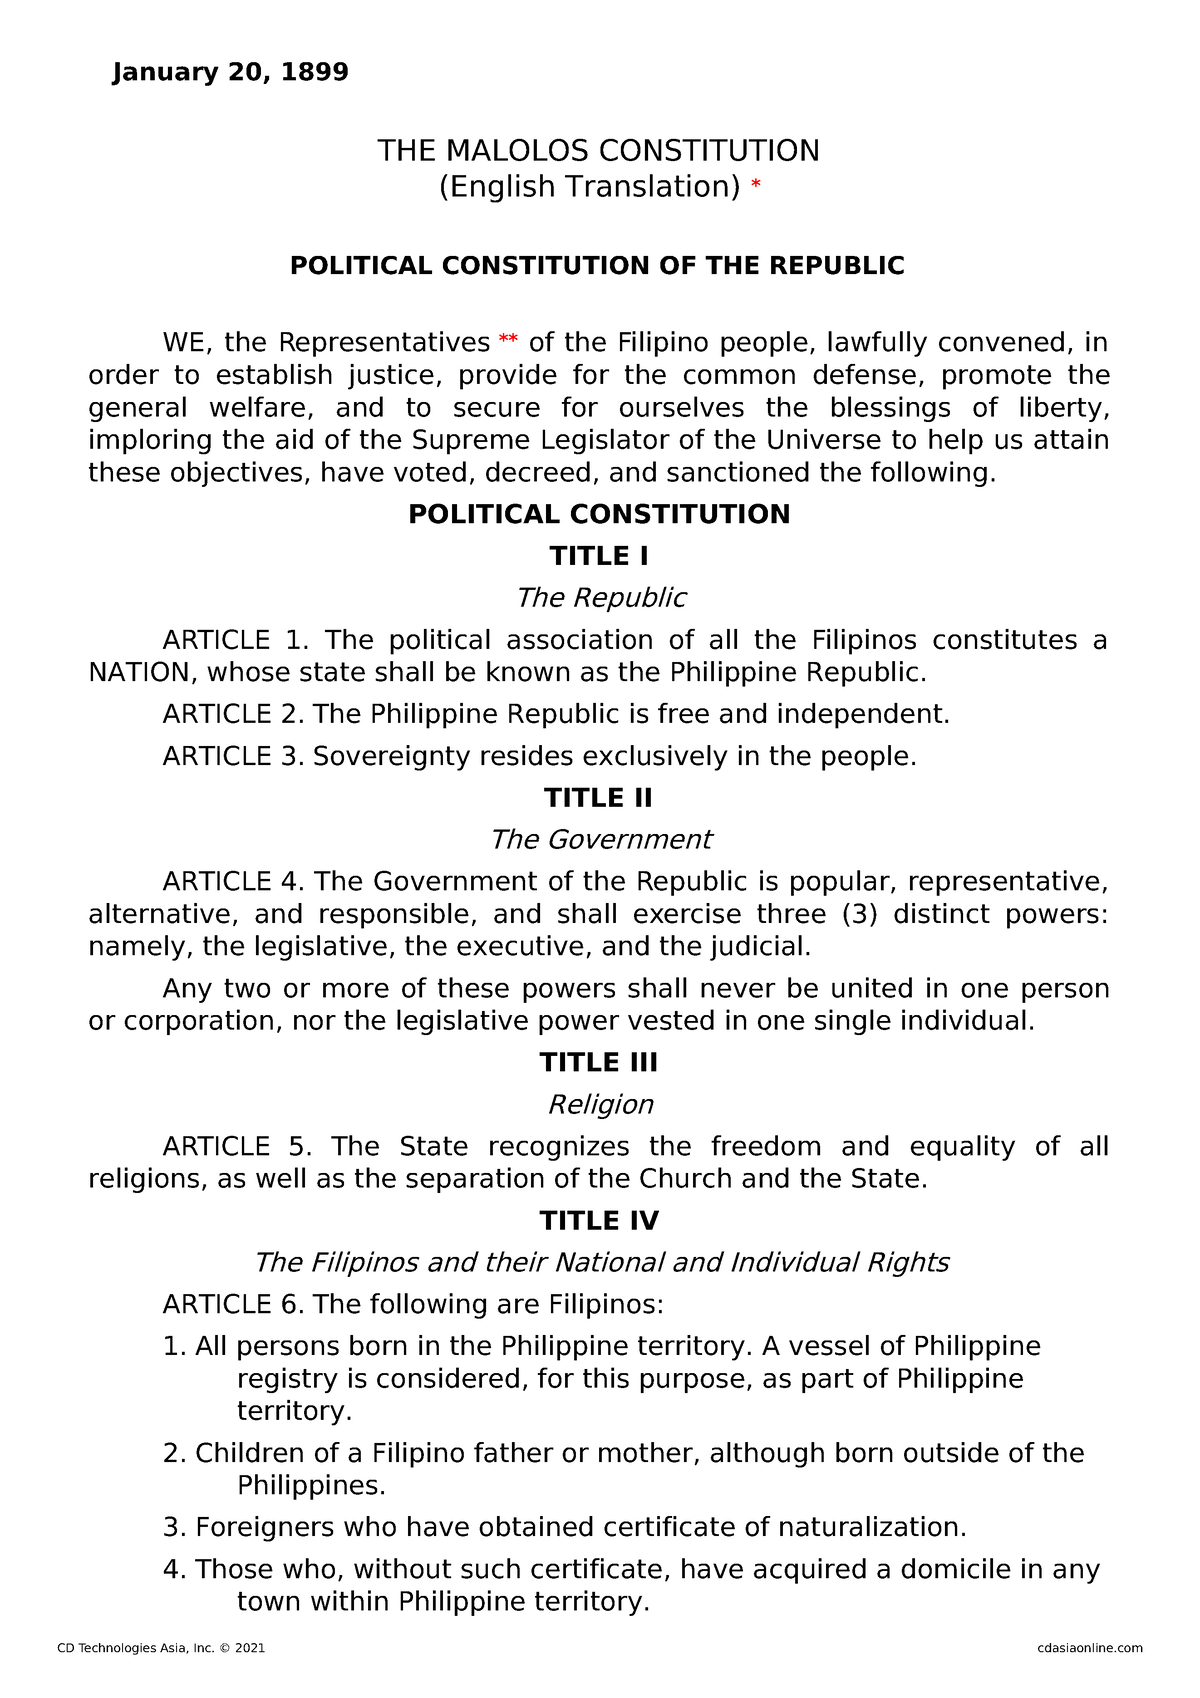 how does the malolos constitution define sovereignty essay brainly